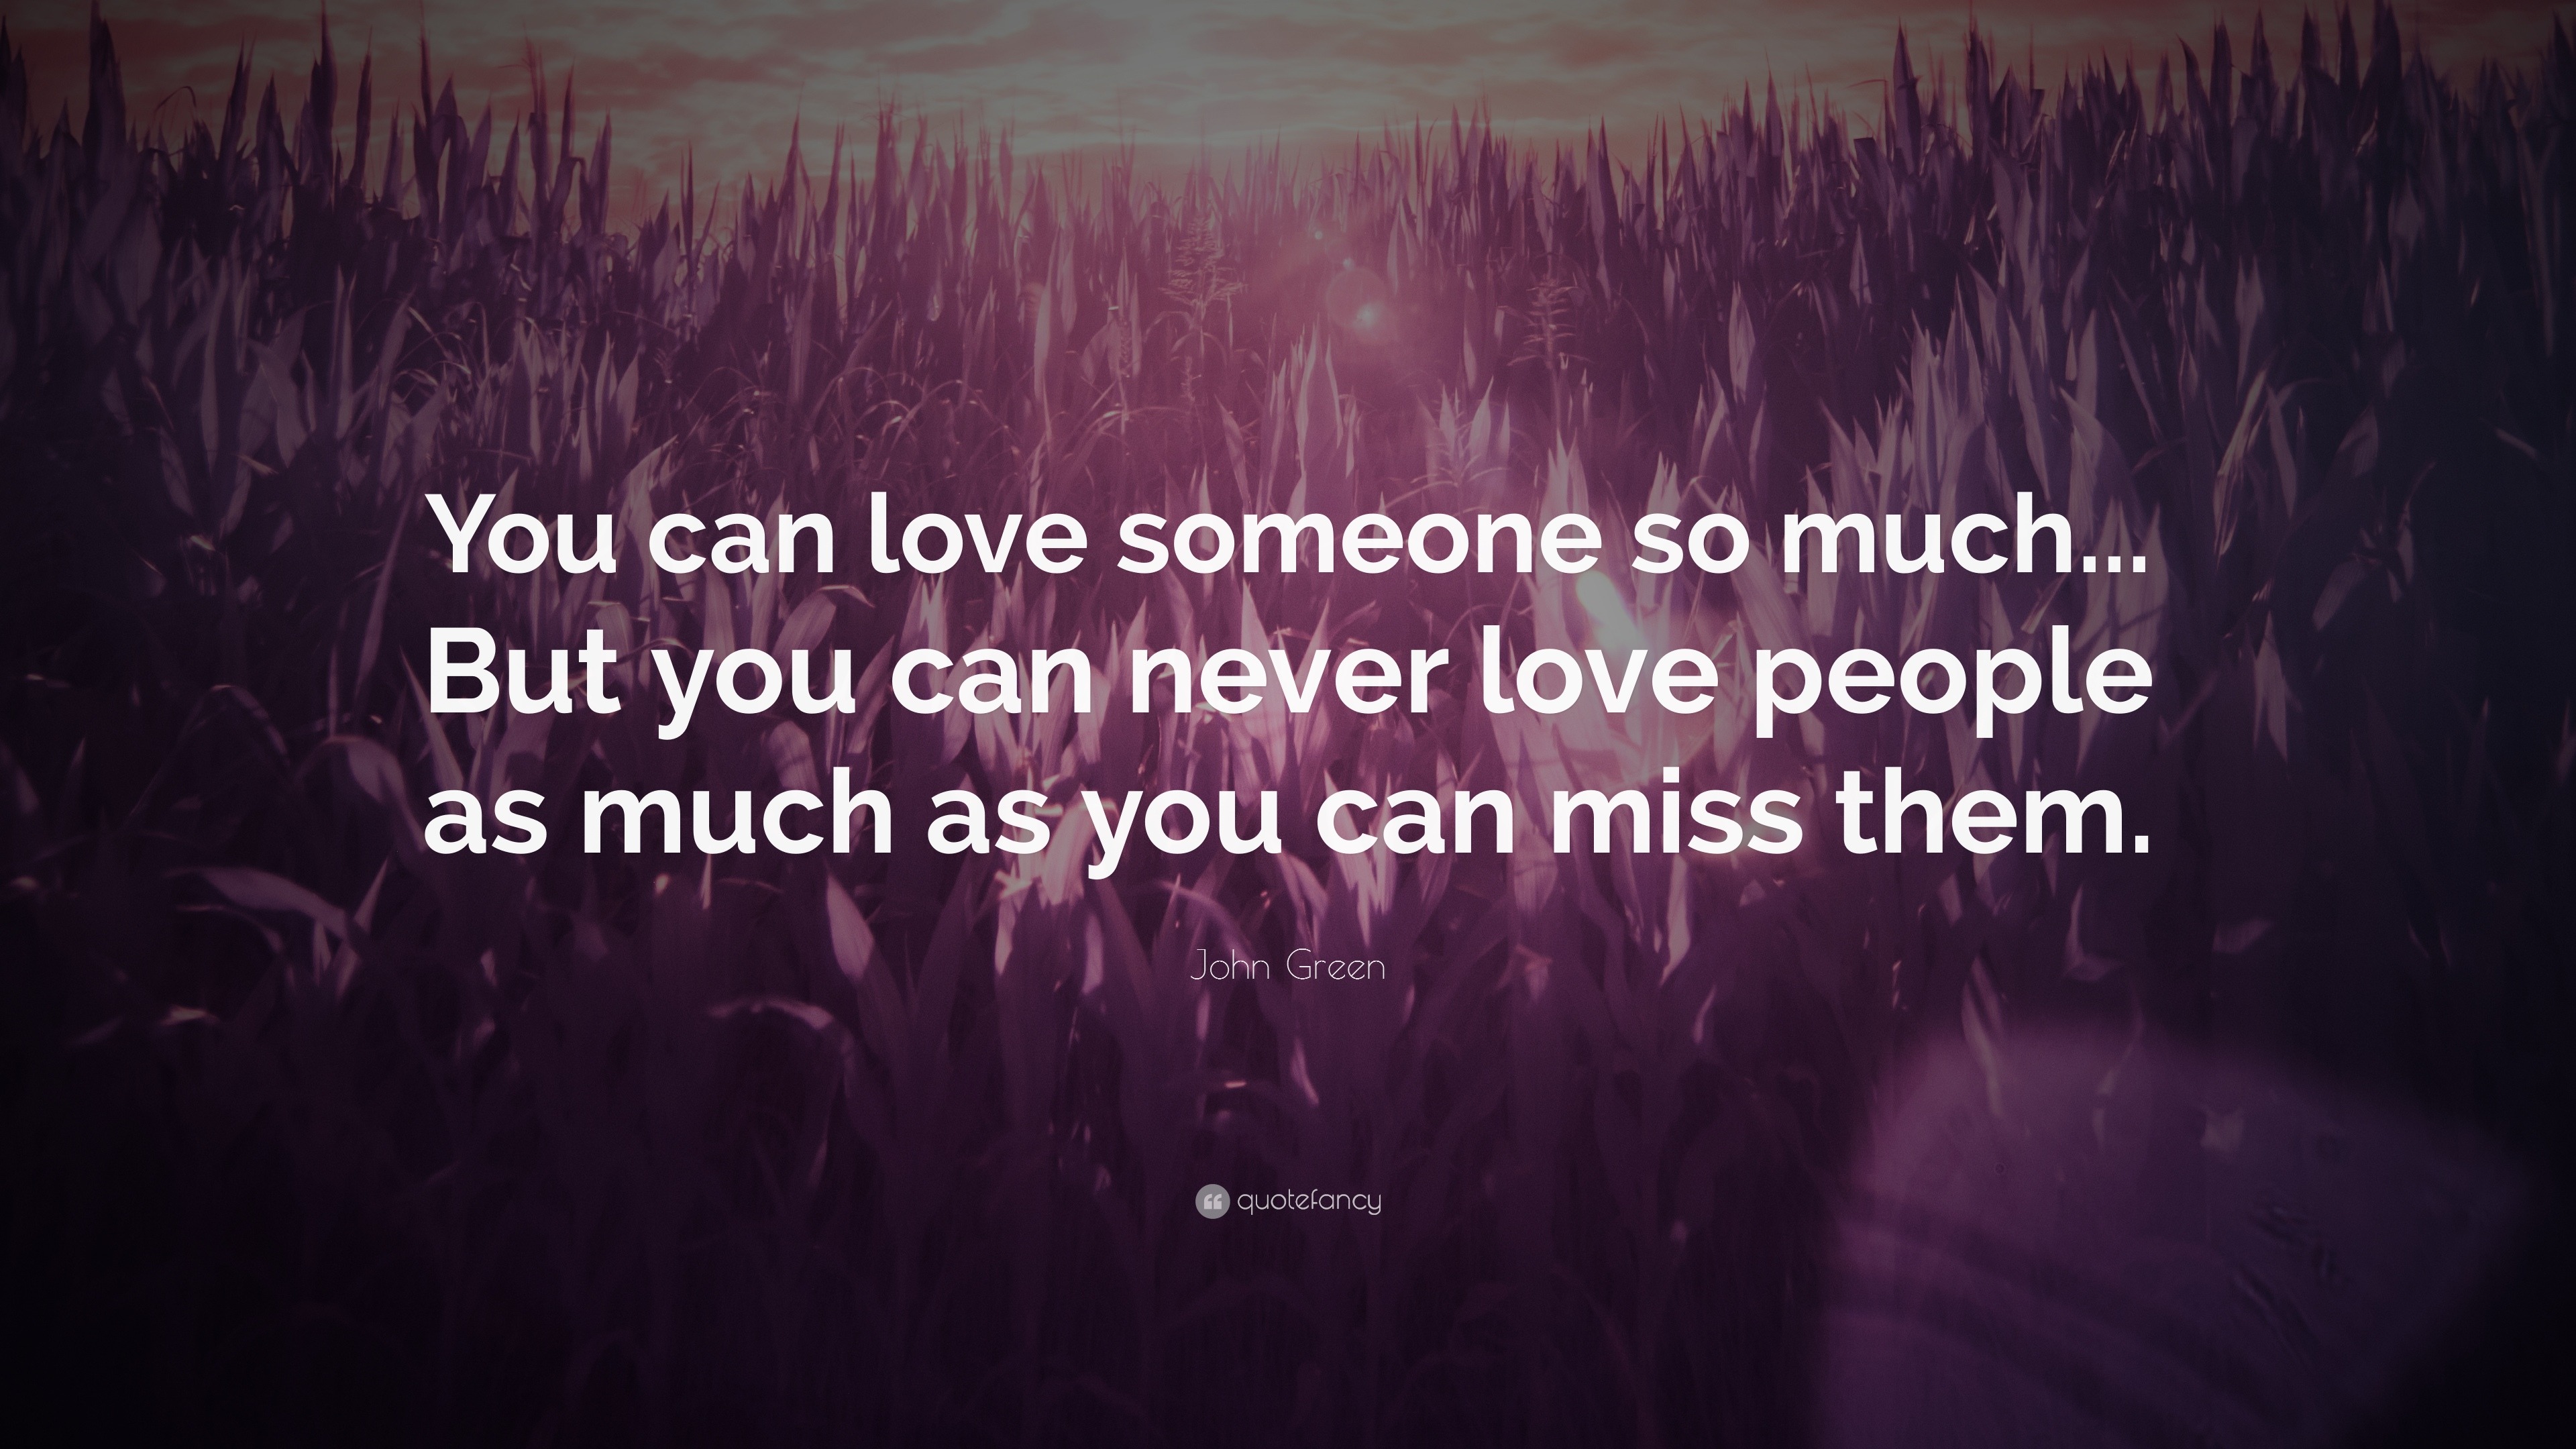 John Green Quote “You can love someone so much But you